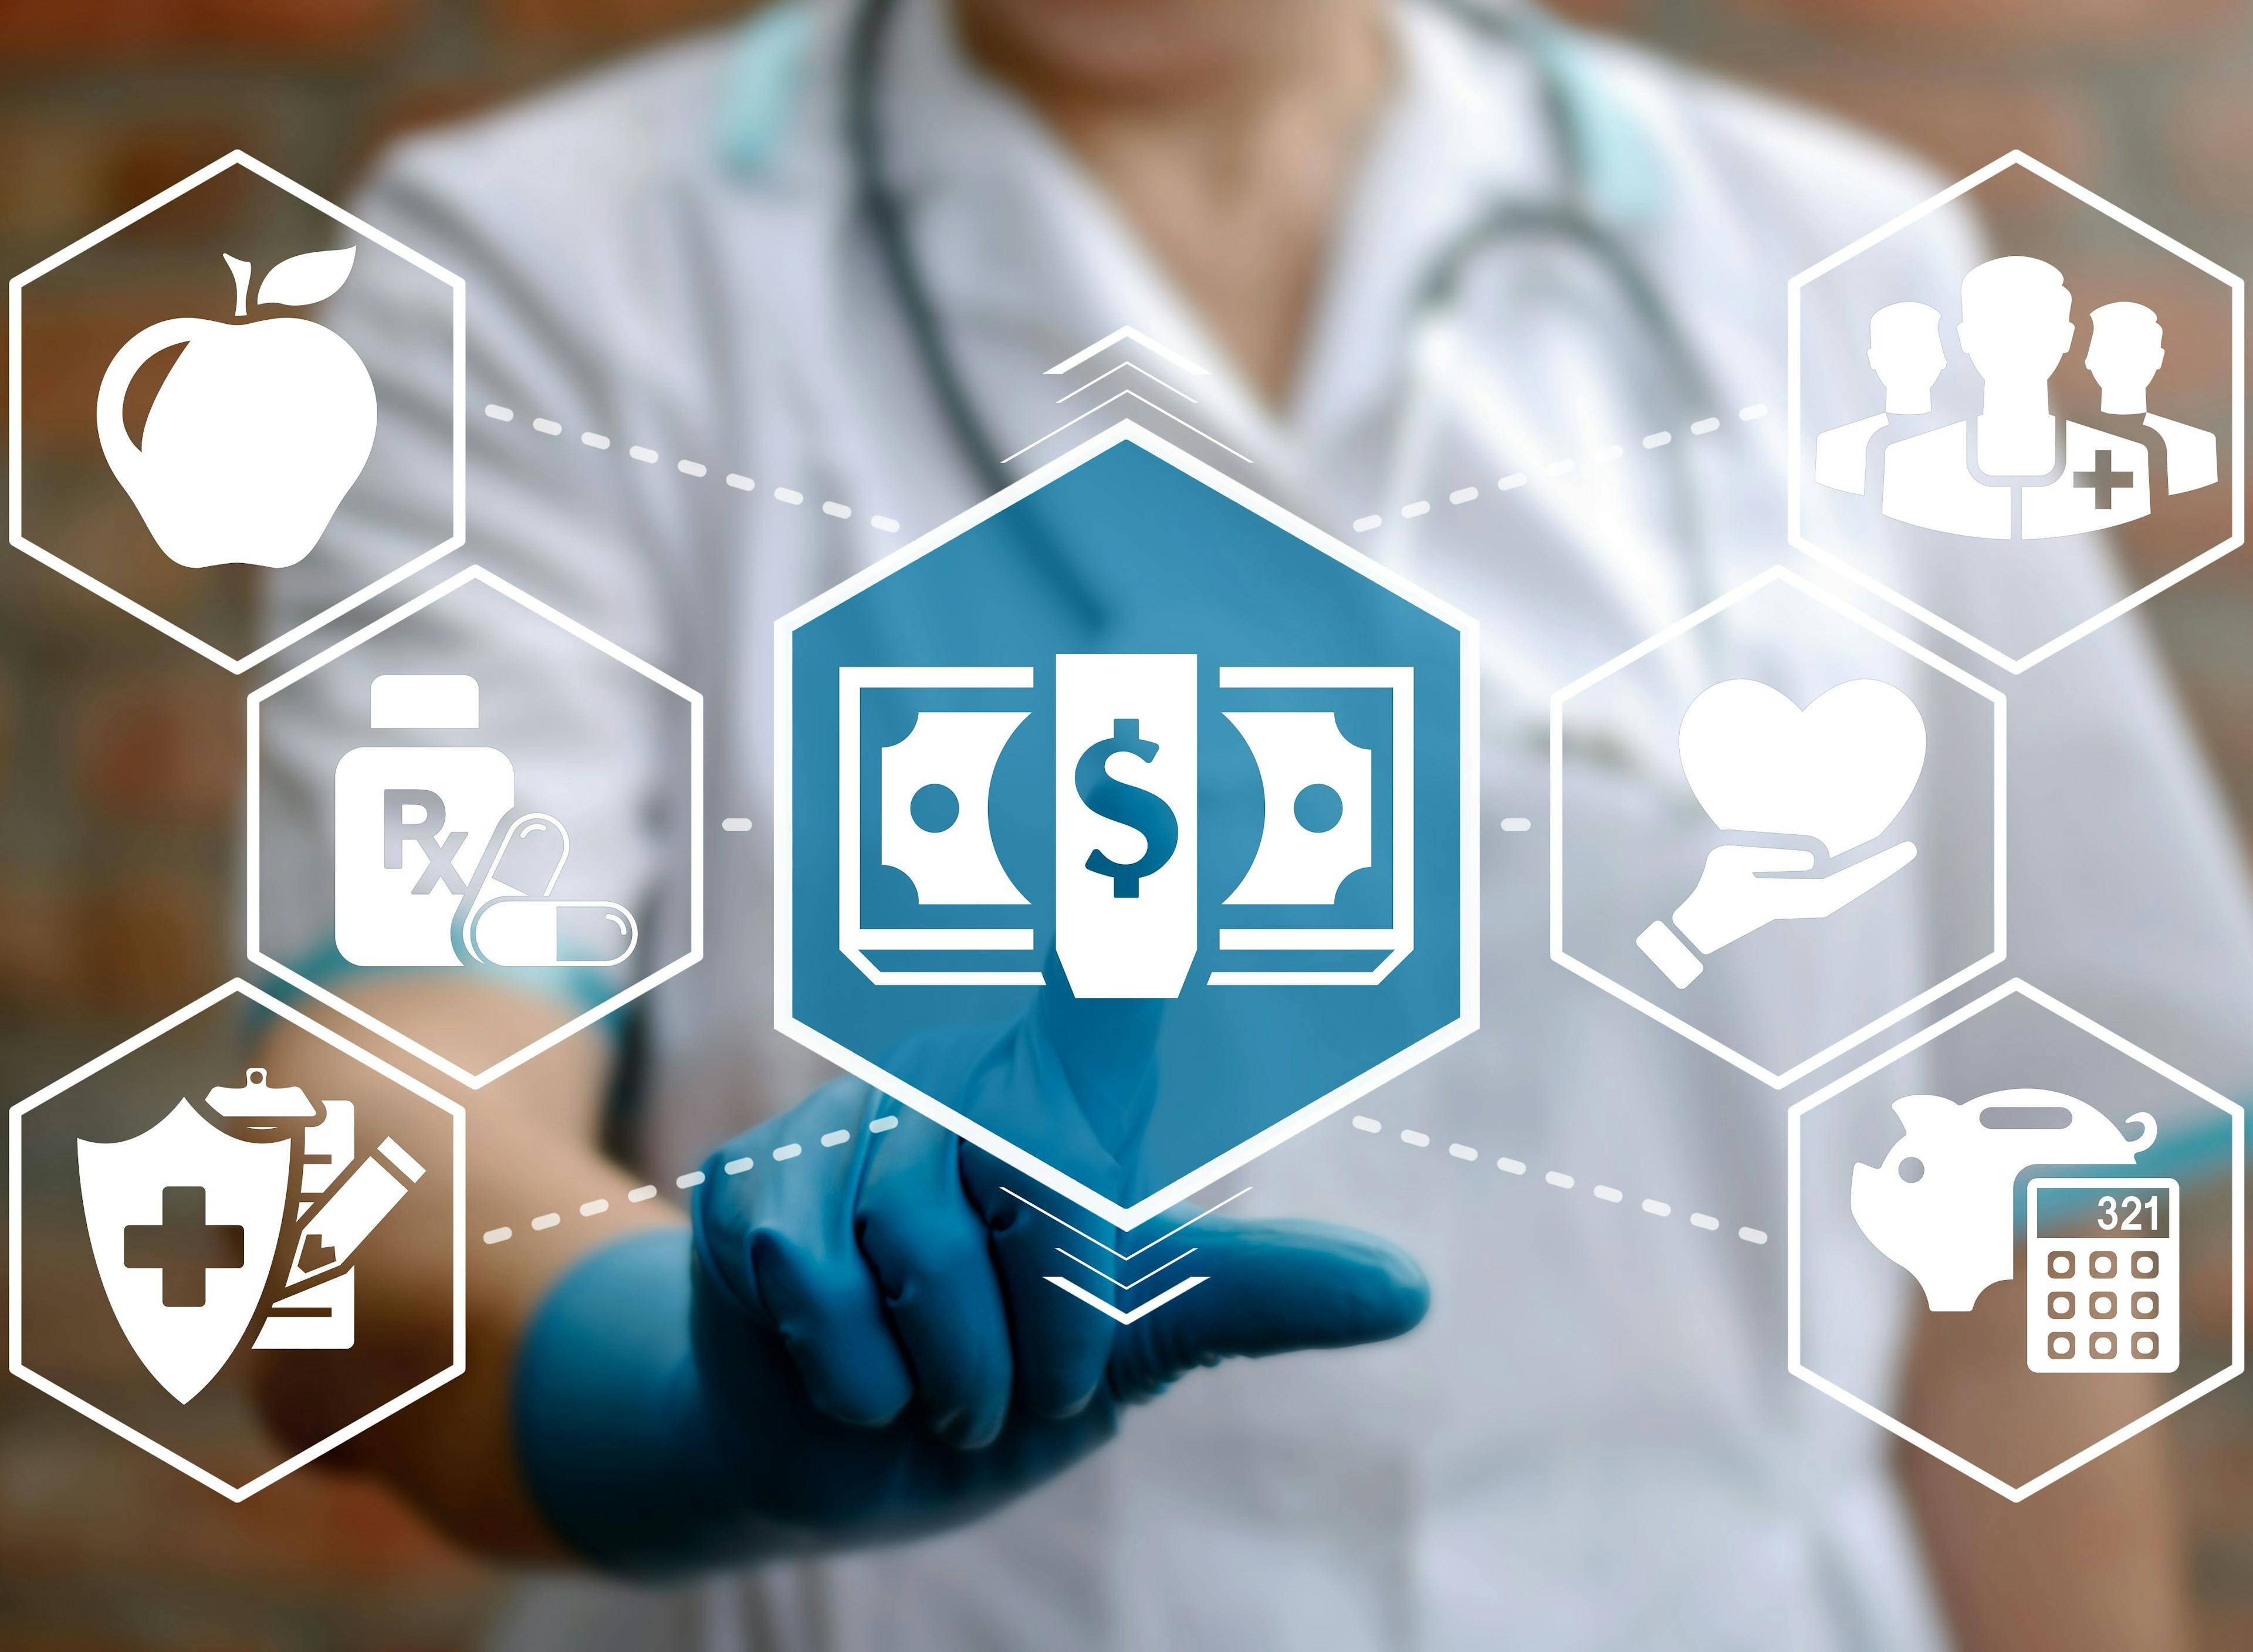 Health care insurance money medical concept. Doctor pressing cash banknote icon on virtual screen on background of network medicine finance healthcare assurance treatment sign | Image credit: wladimir1804 - stock.adobe.com